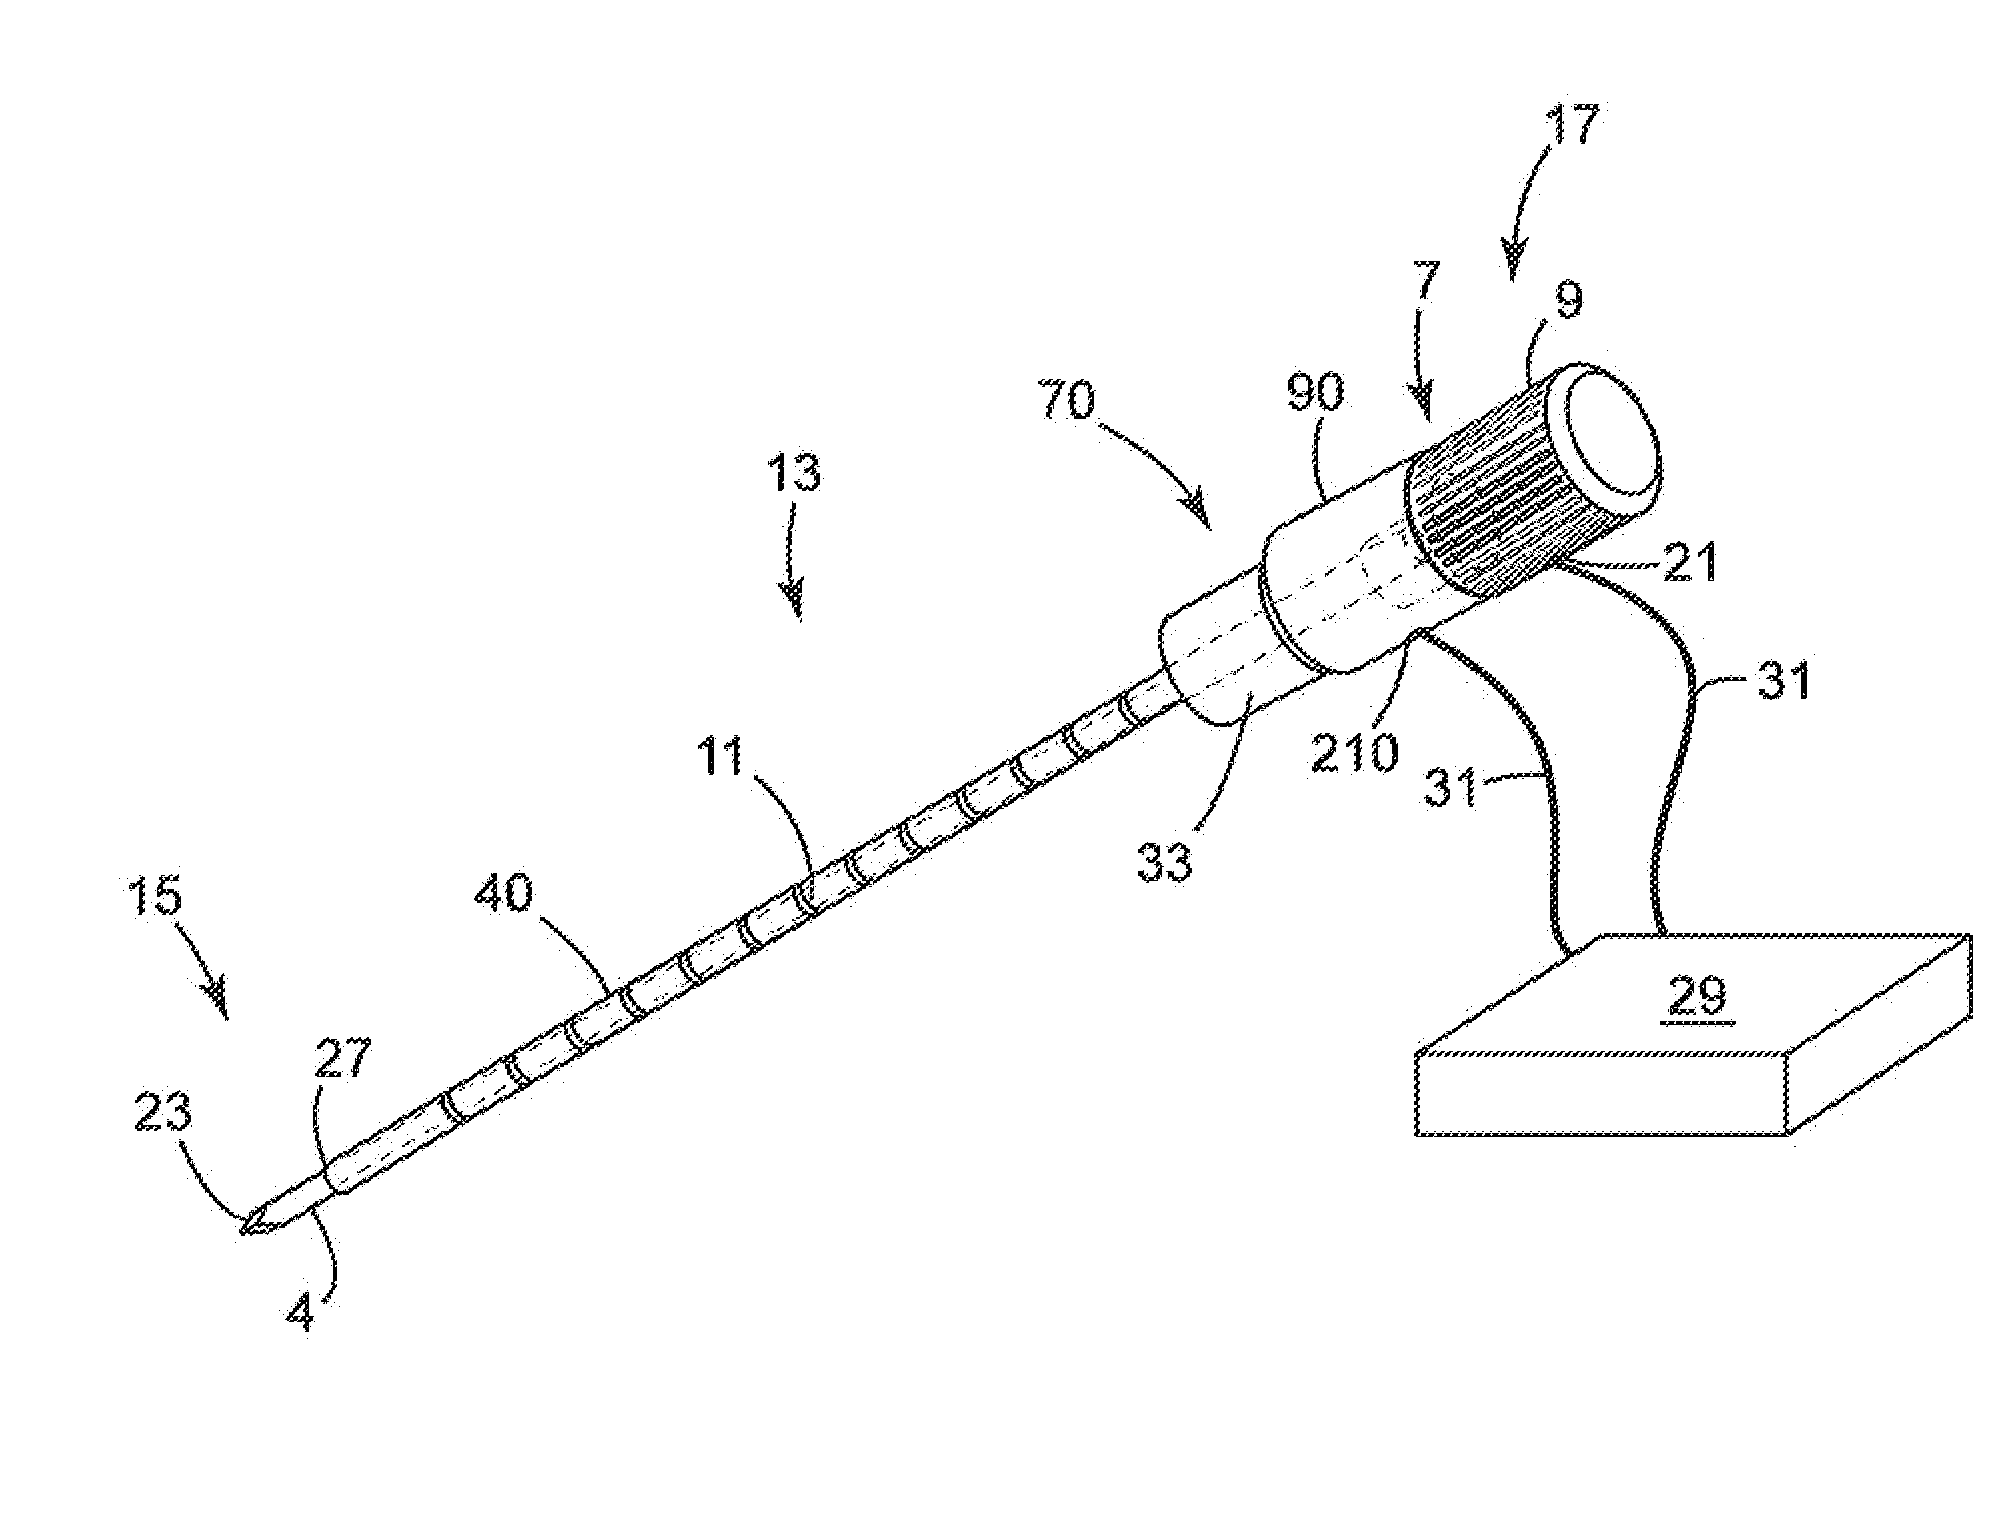 Coaxial dual function probe and method of use